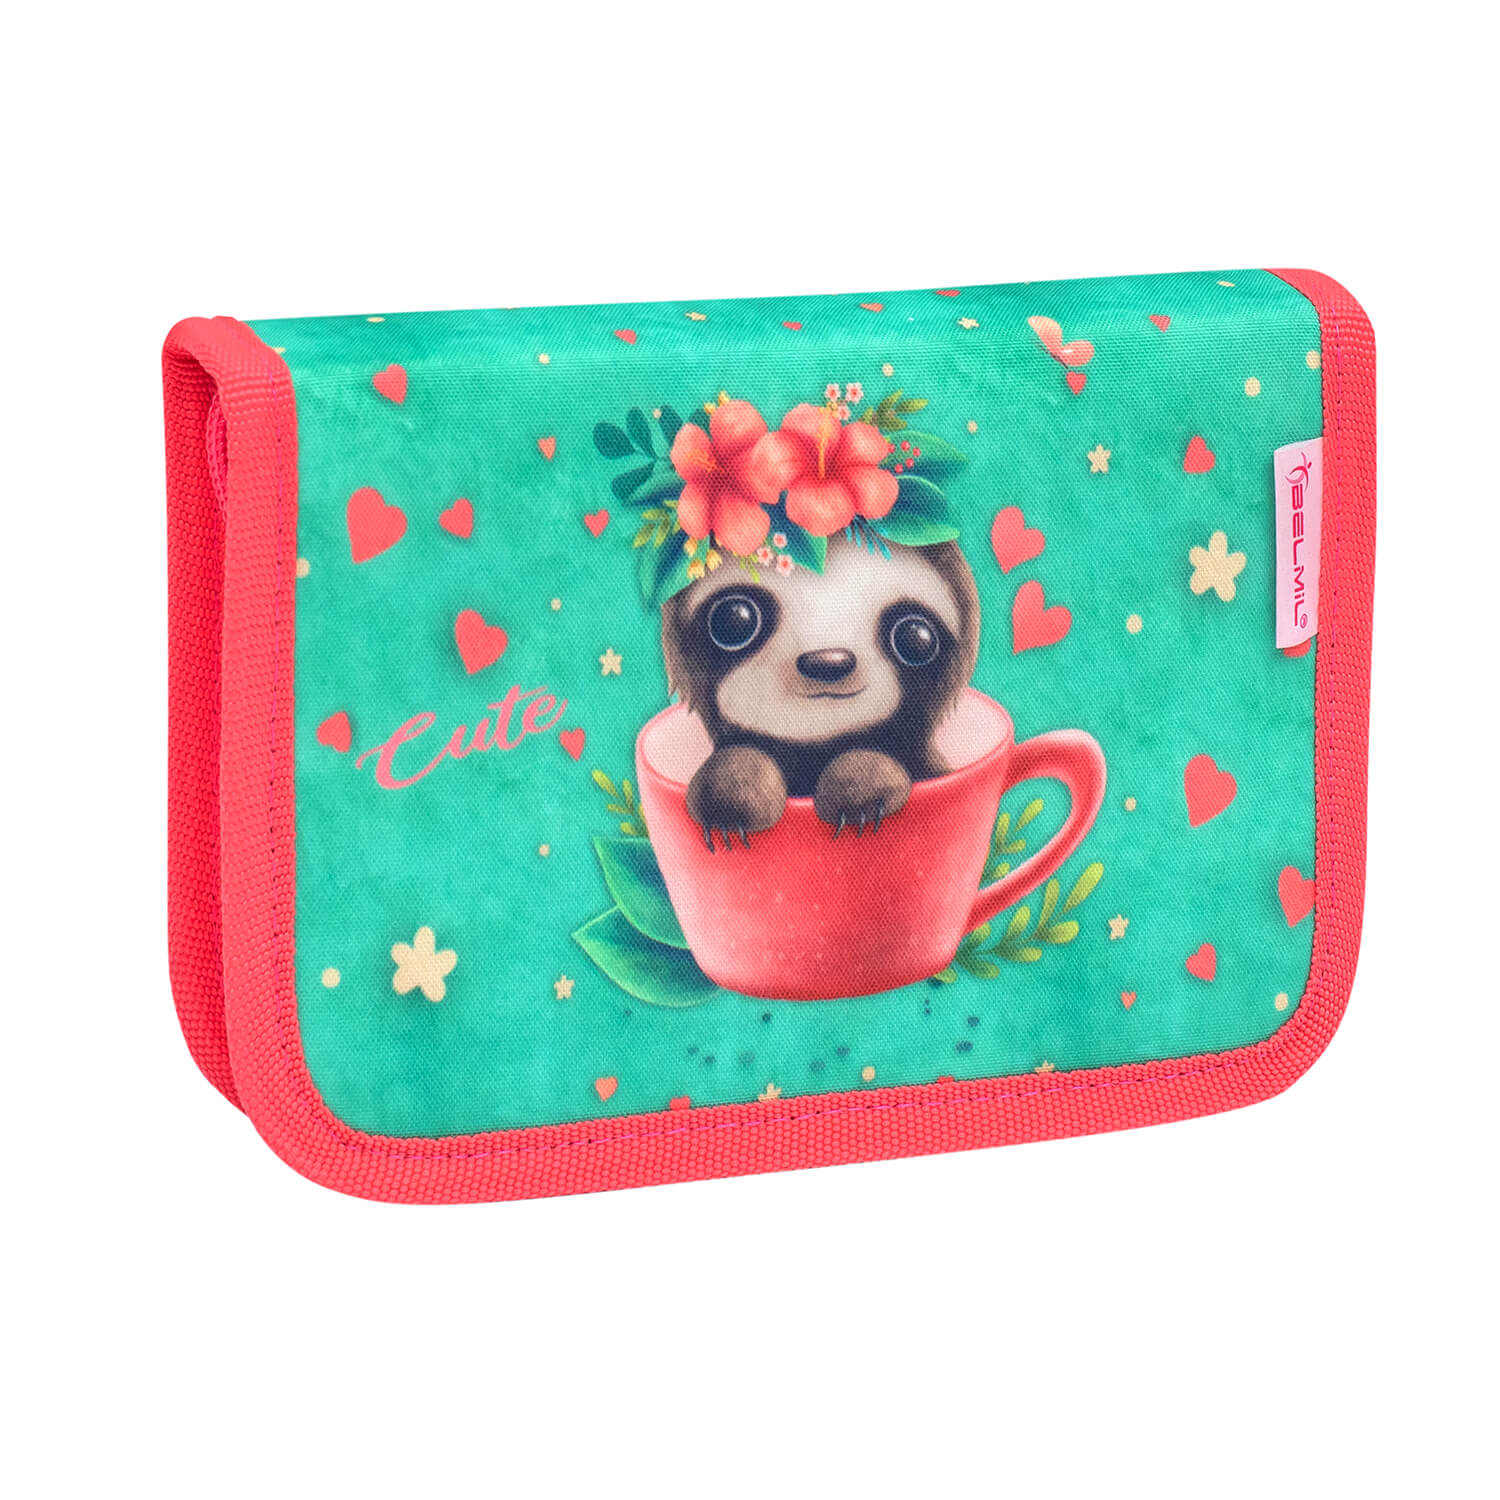 Compact Cute Sloth schoolbag set 5 pcs with GRATIS keychain